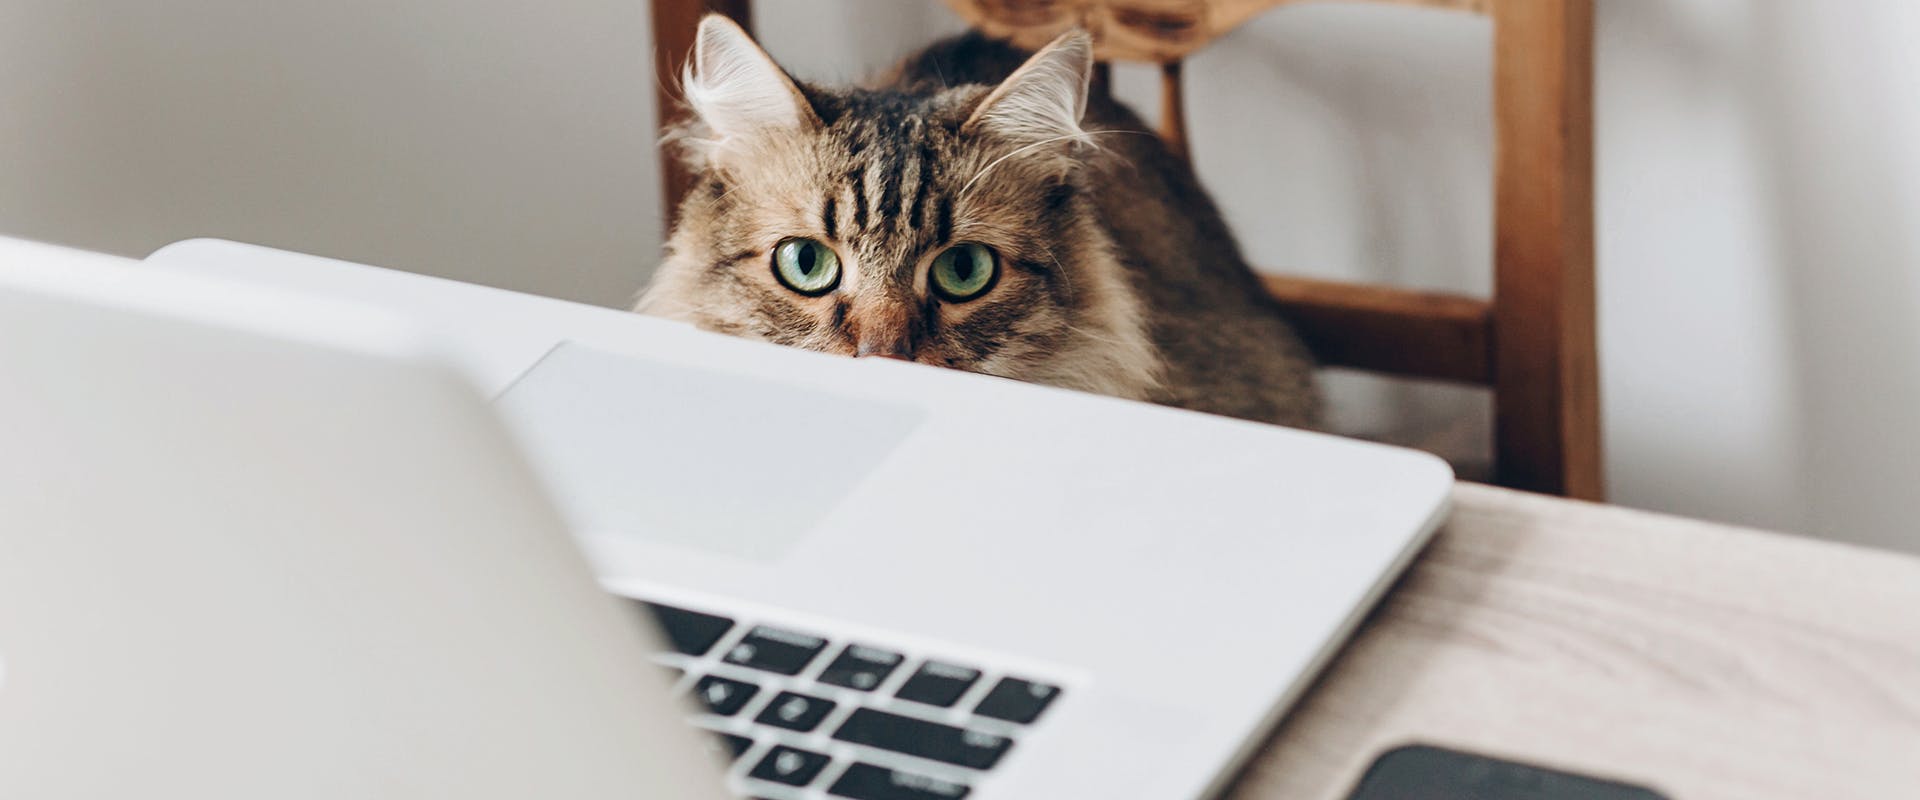 A cat sitting on a dining chair in front of an open laptop screen, peering with just its eyes visible